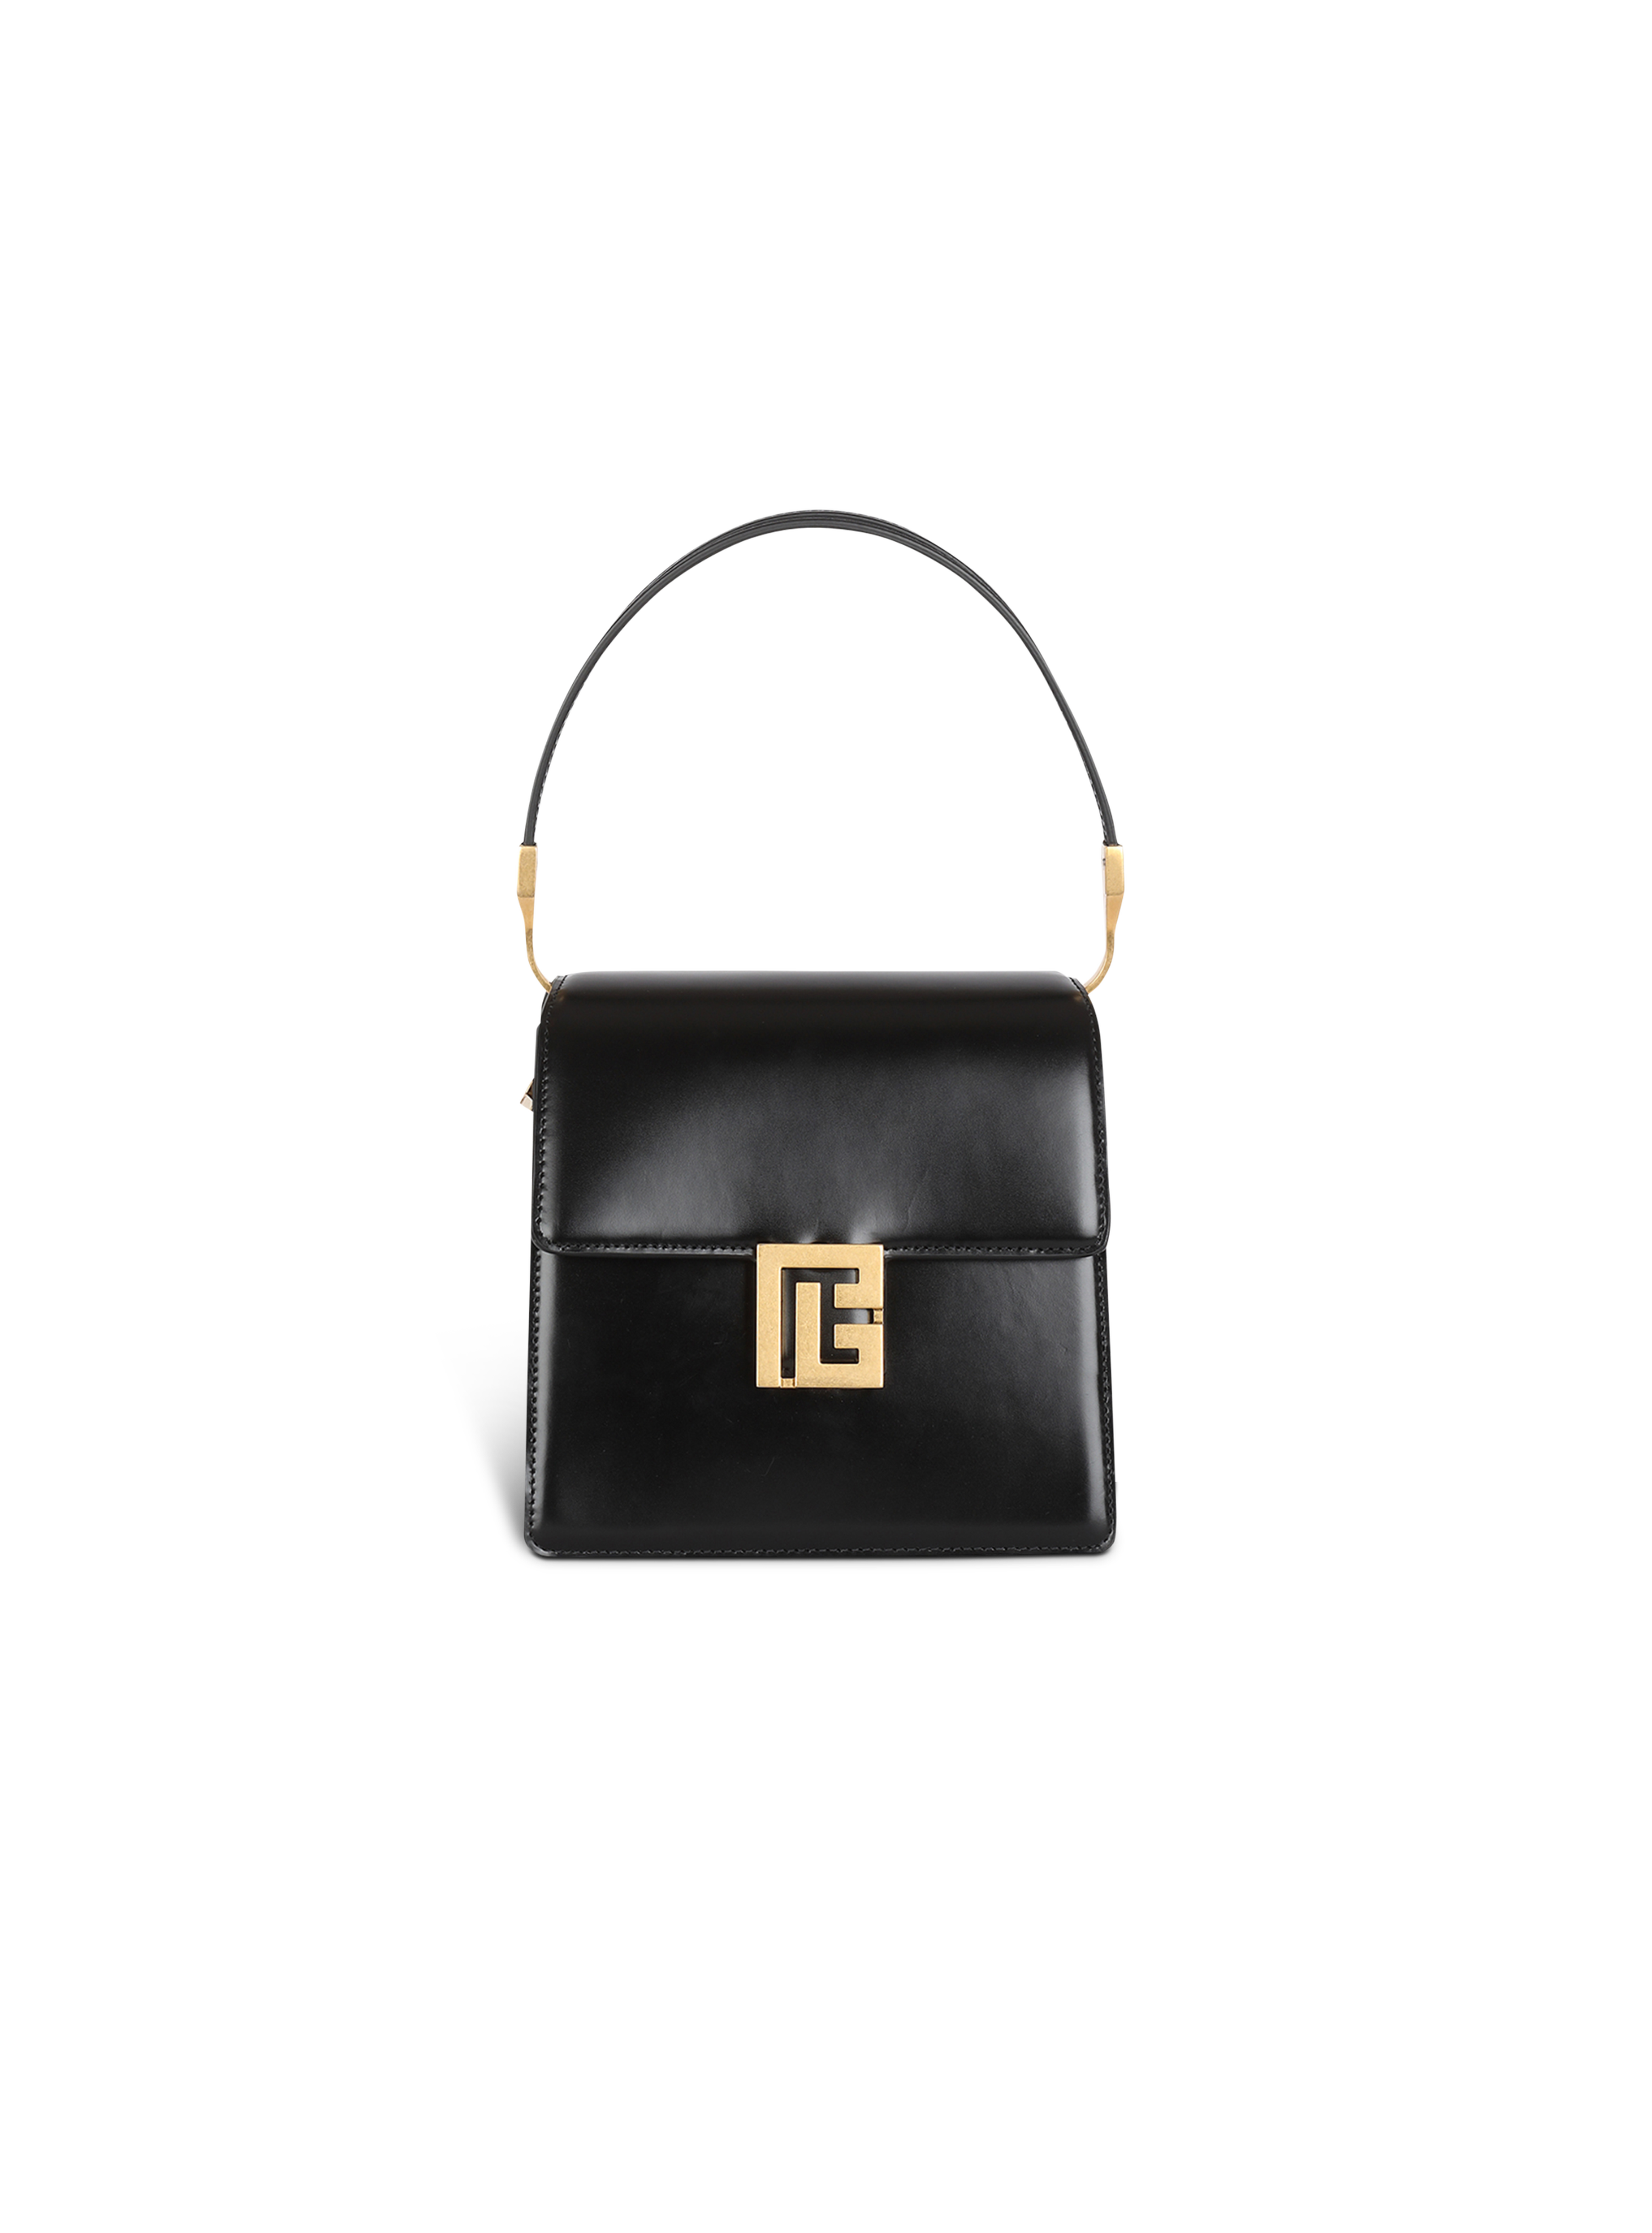 Shiny smooth leather Ely bag, black